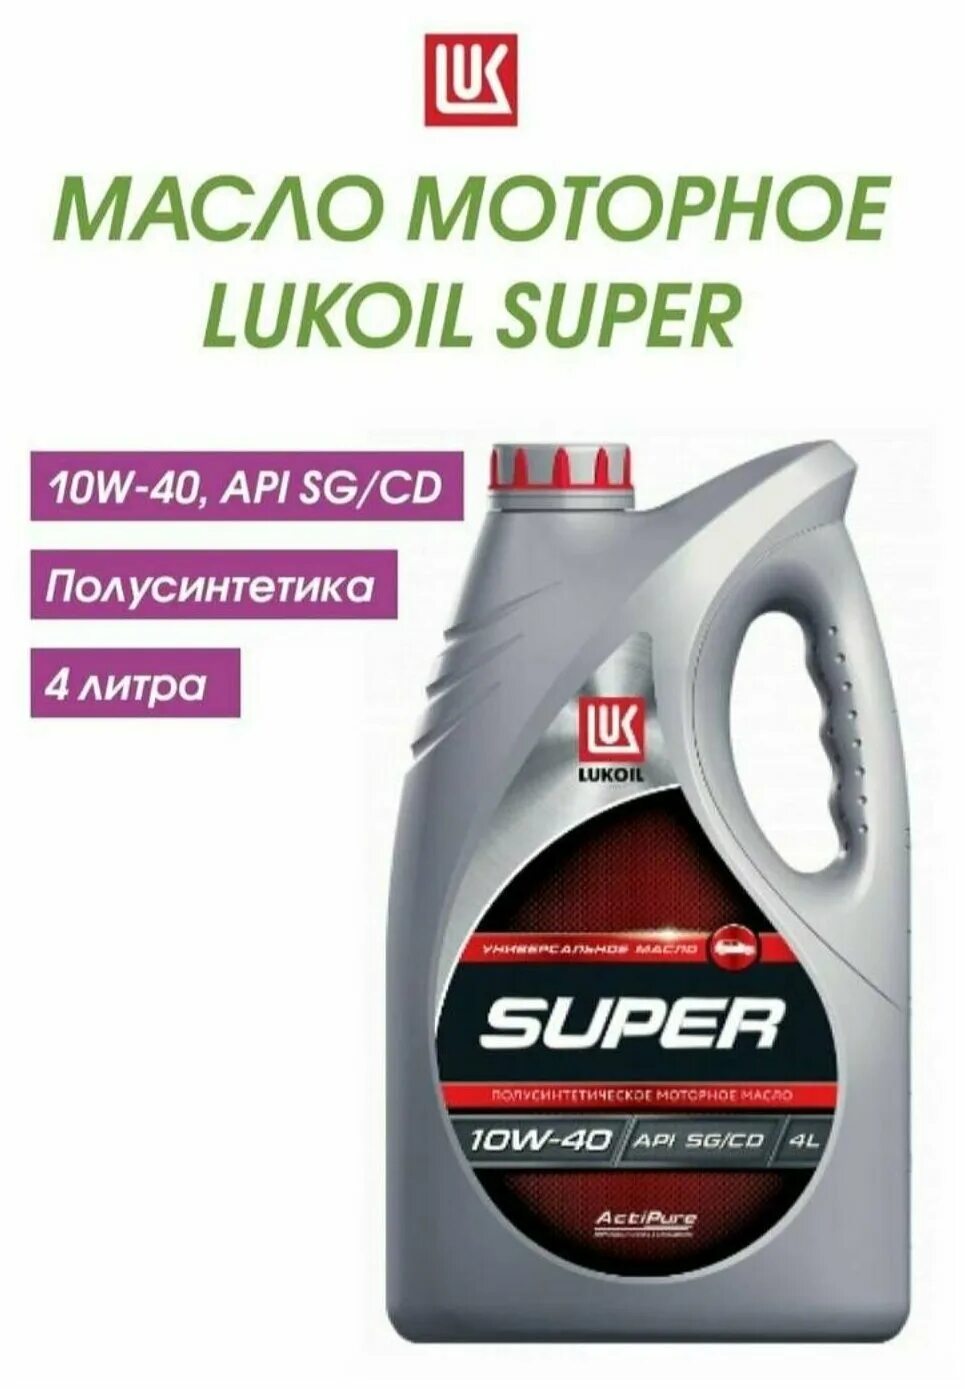 Масло моторное Лукойл 10w-40 super. Lukoil super 5w-40. Моторное масло Лукойл (Lukoil) 5w-40 полусинтетическое 4 л. Масло Лукойл супер 10w 40 полусинтетика. Лукойл масло моторное 5w40 4л